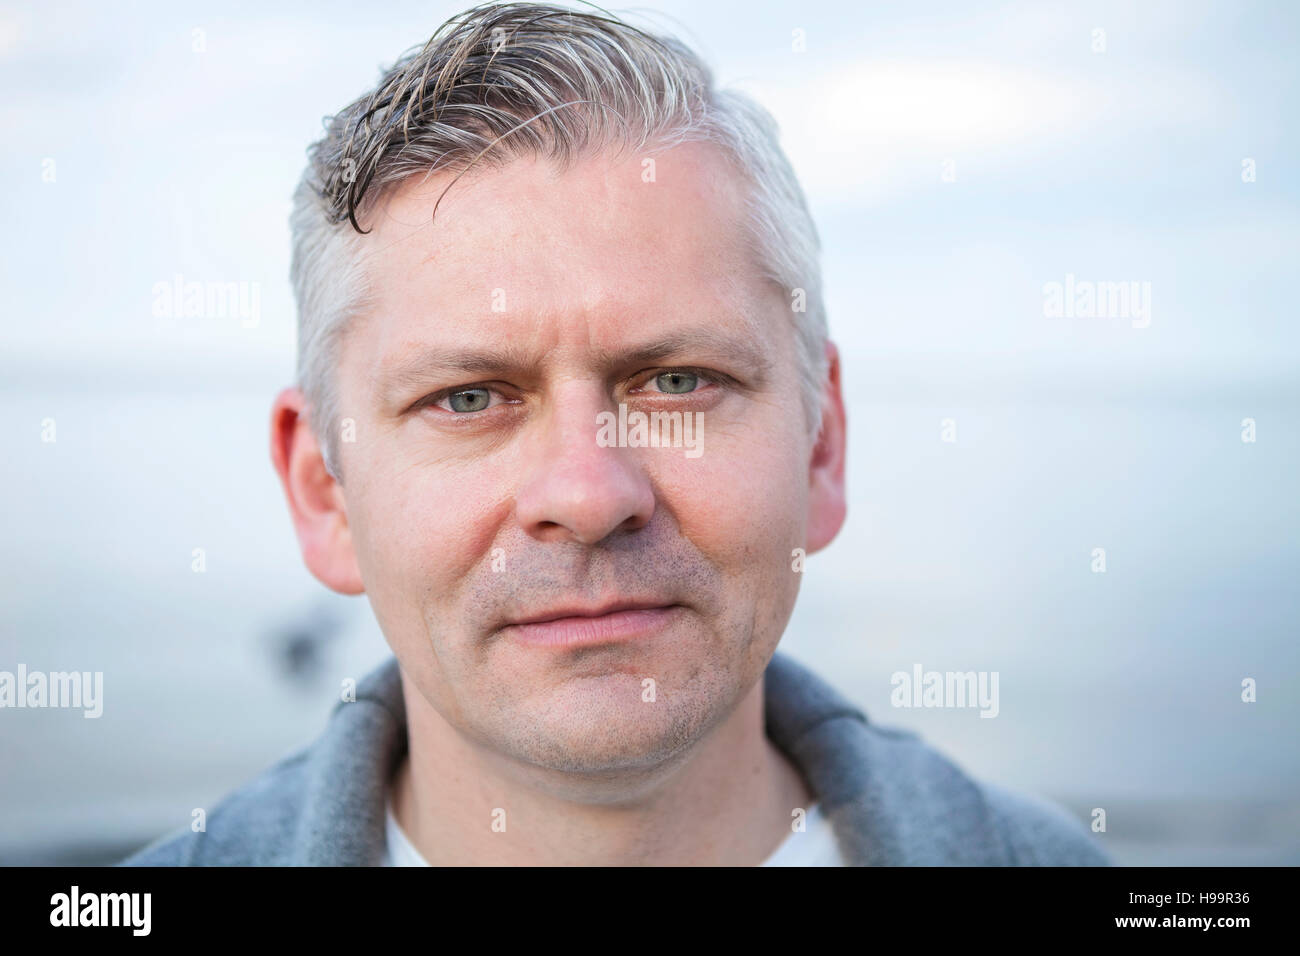 Portrait of mature man with gray hair Stock Photo